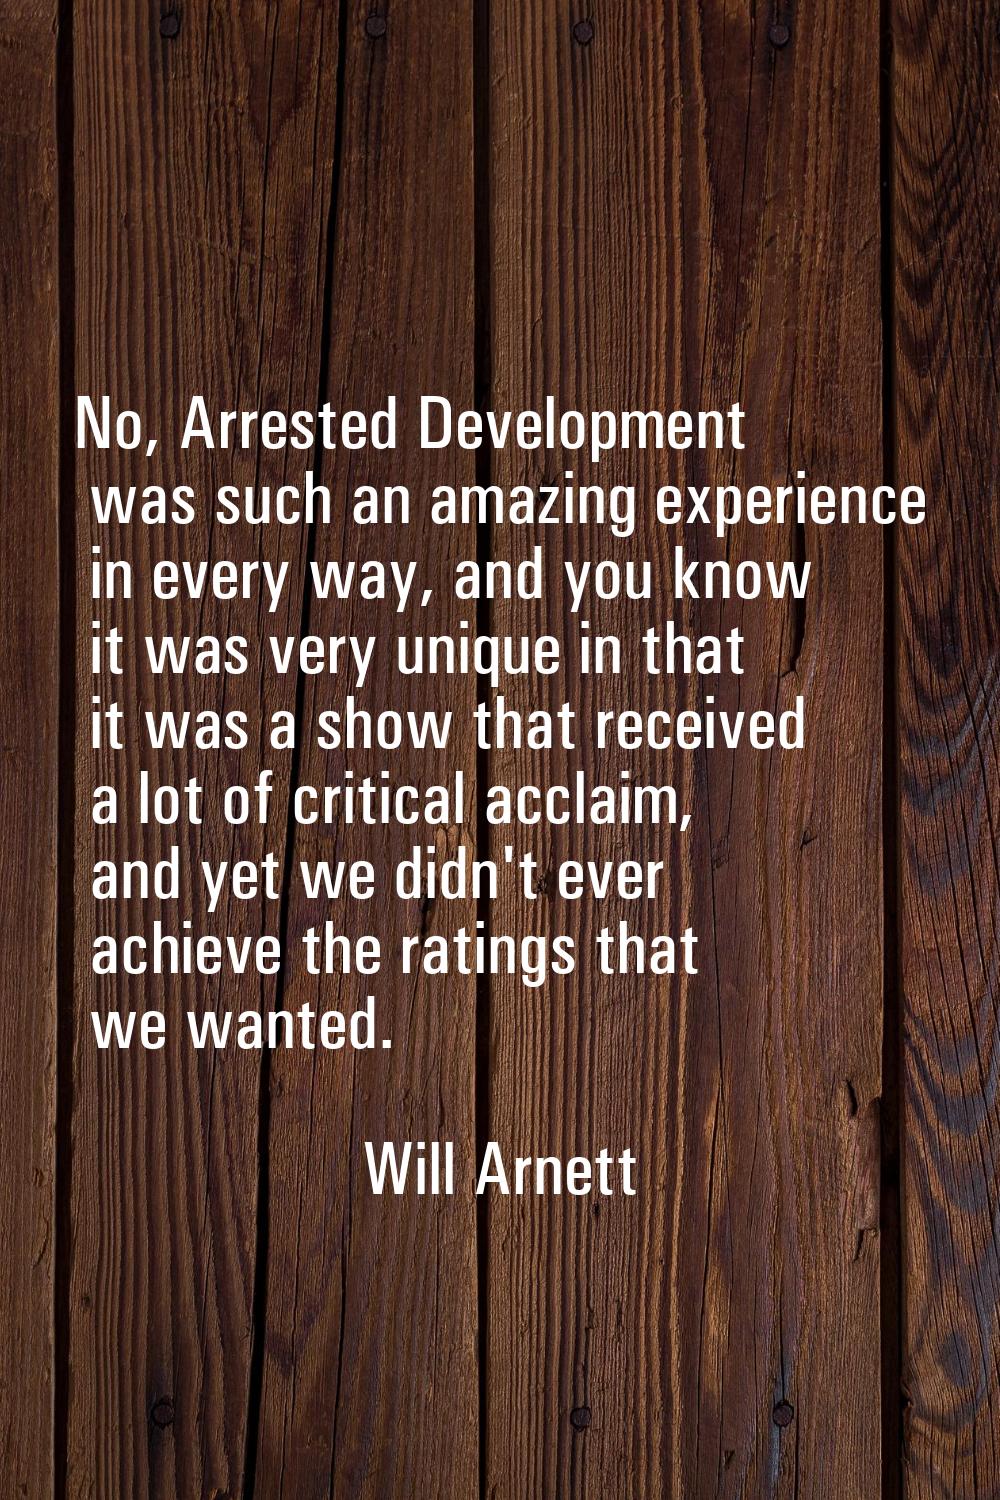 No, Arrested Development was such an amazing experience in every way, and you know it was very uniq